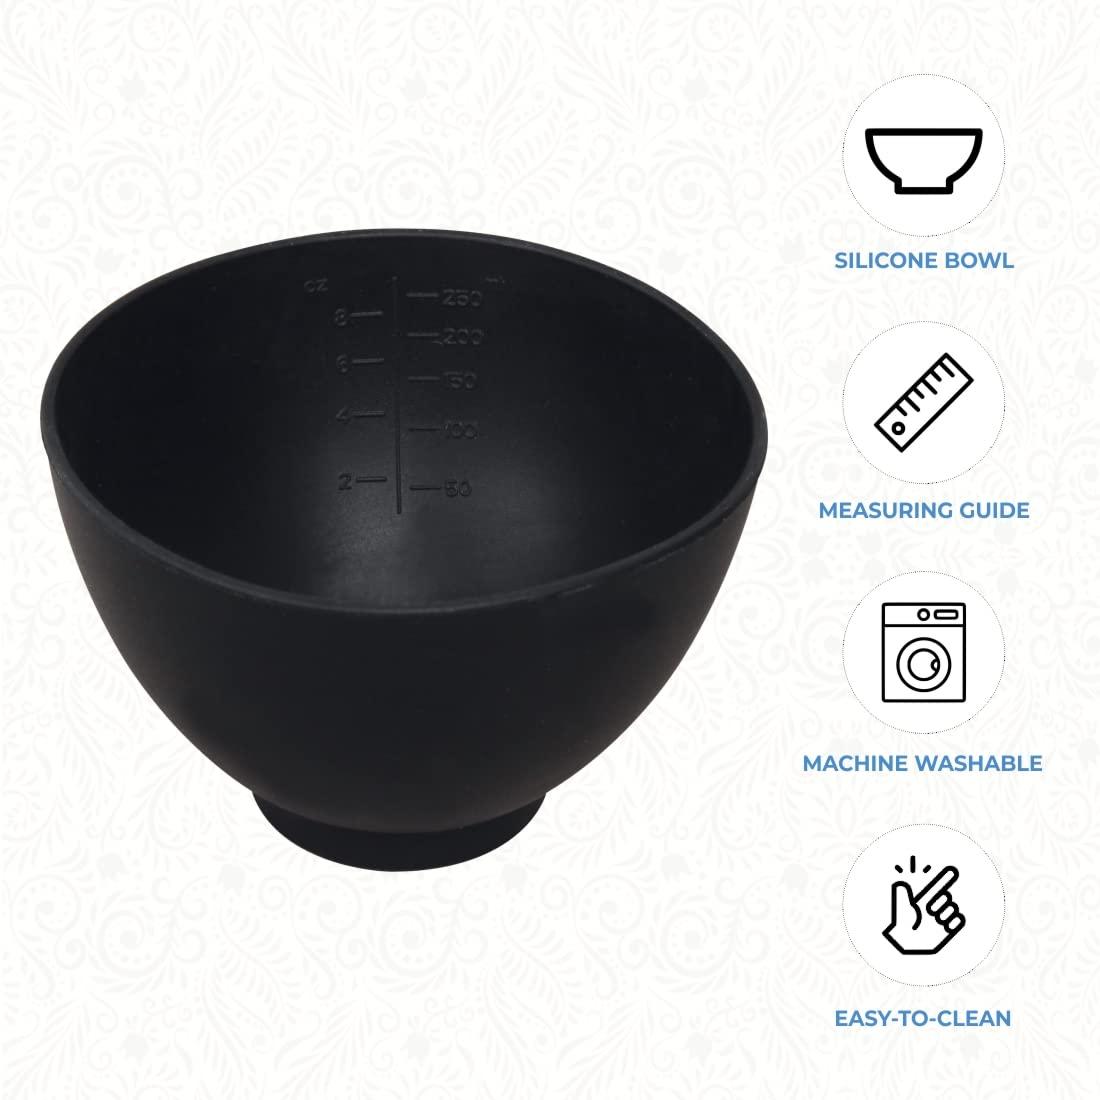 ForPro Silicone Mixing Bowl, Black, Flexible, Odorless, for Mixing Facials,  Massage, Body & Other Products, 8 oz 8 oz.